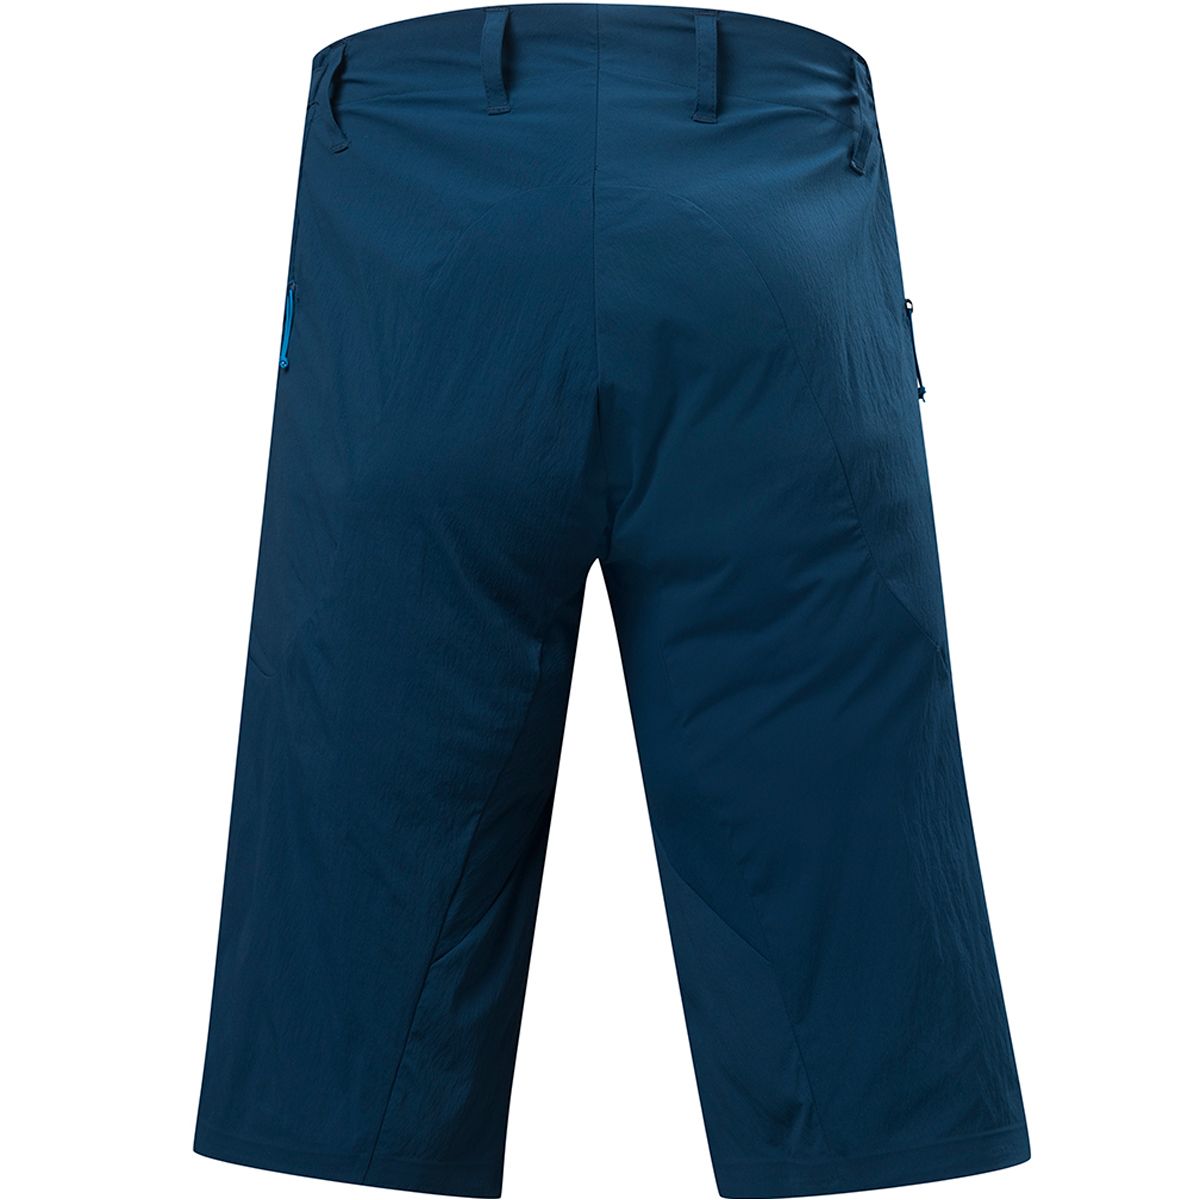 7mesh Industries Glidepath Short - Men's | Competitive Cyclist